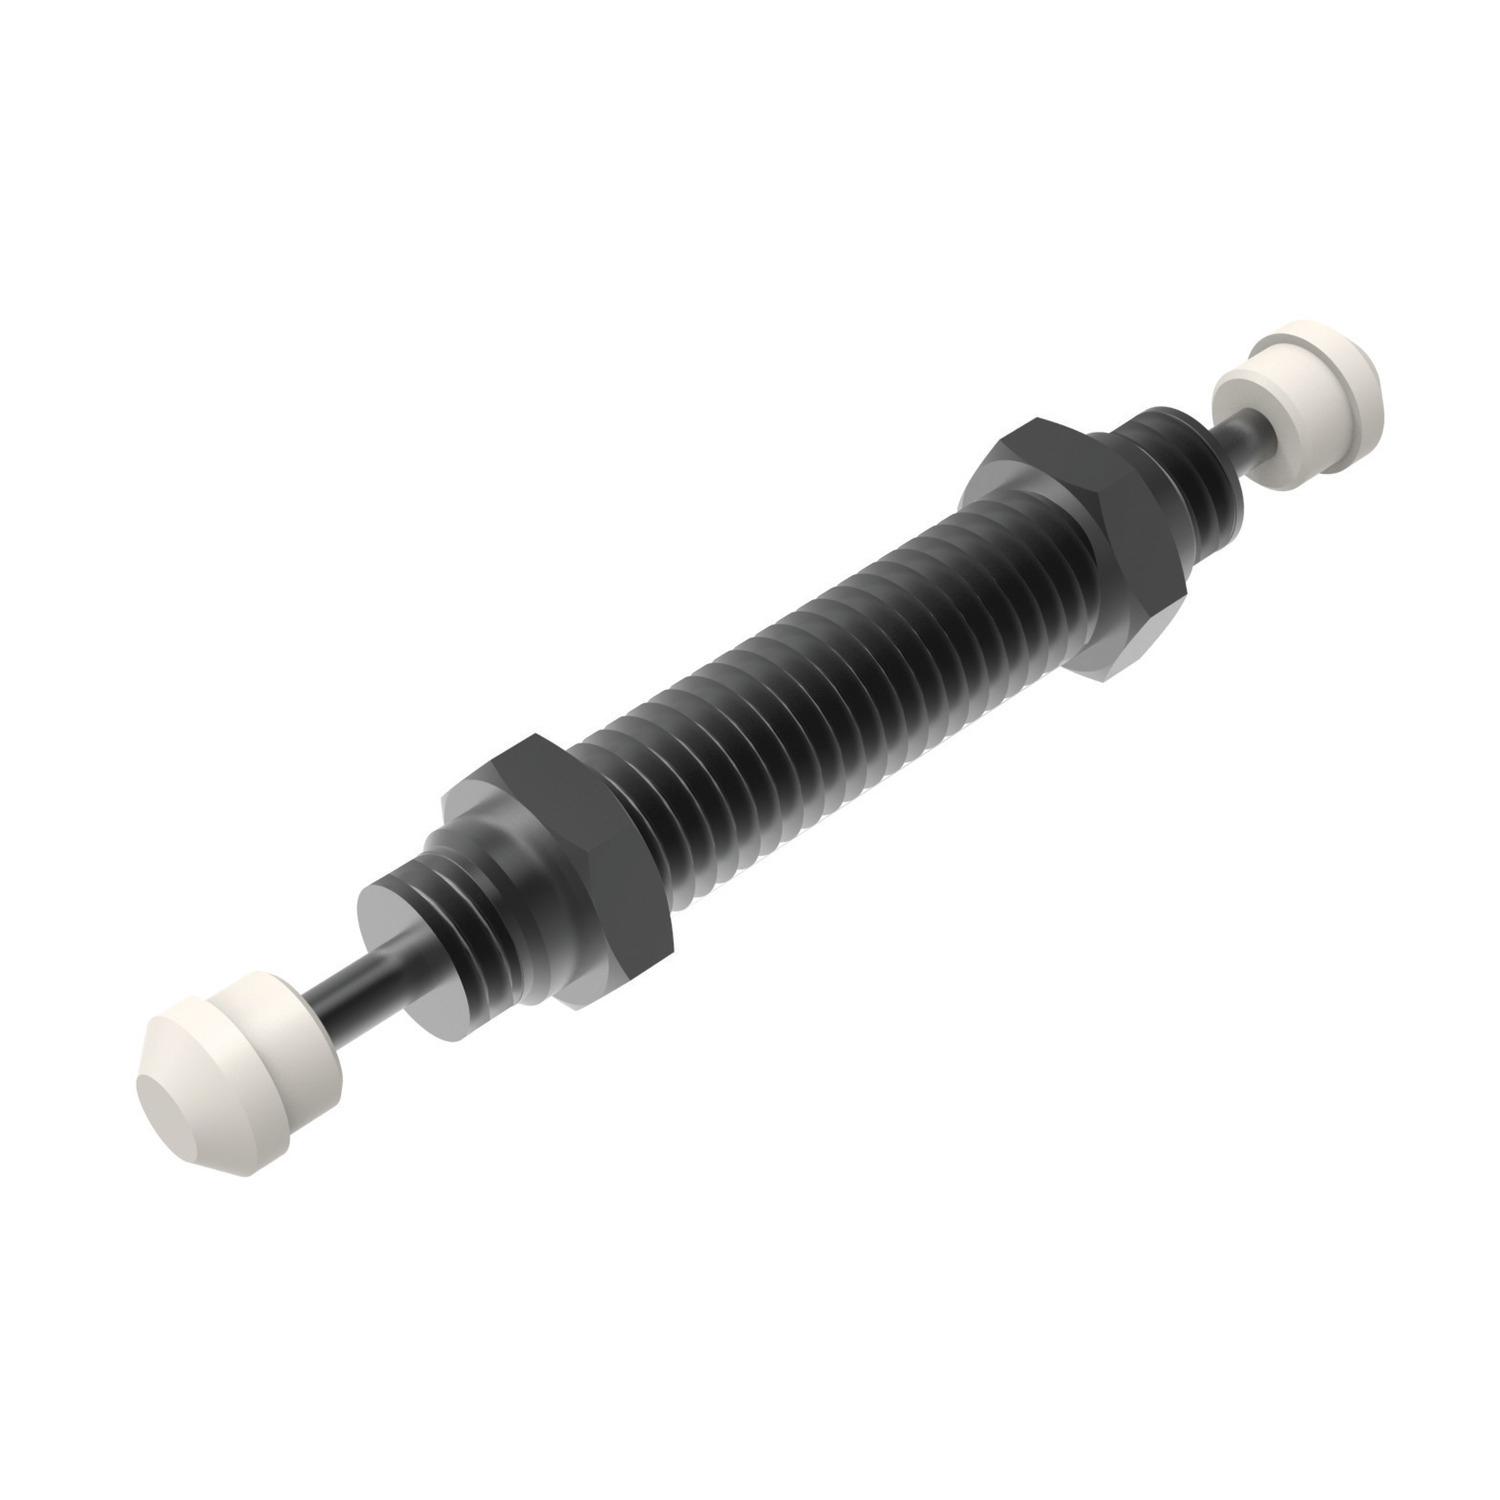 Product 68004, Double Cushion Shock Absorbers M20, self-compensating, non-adjustable / 